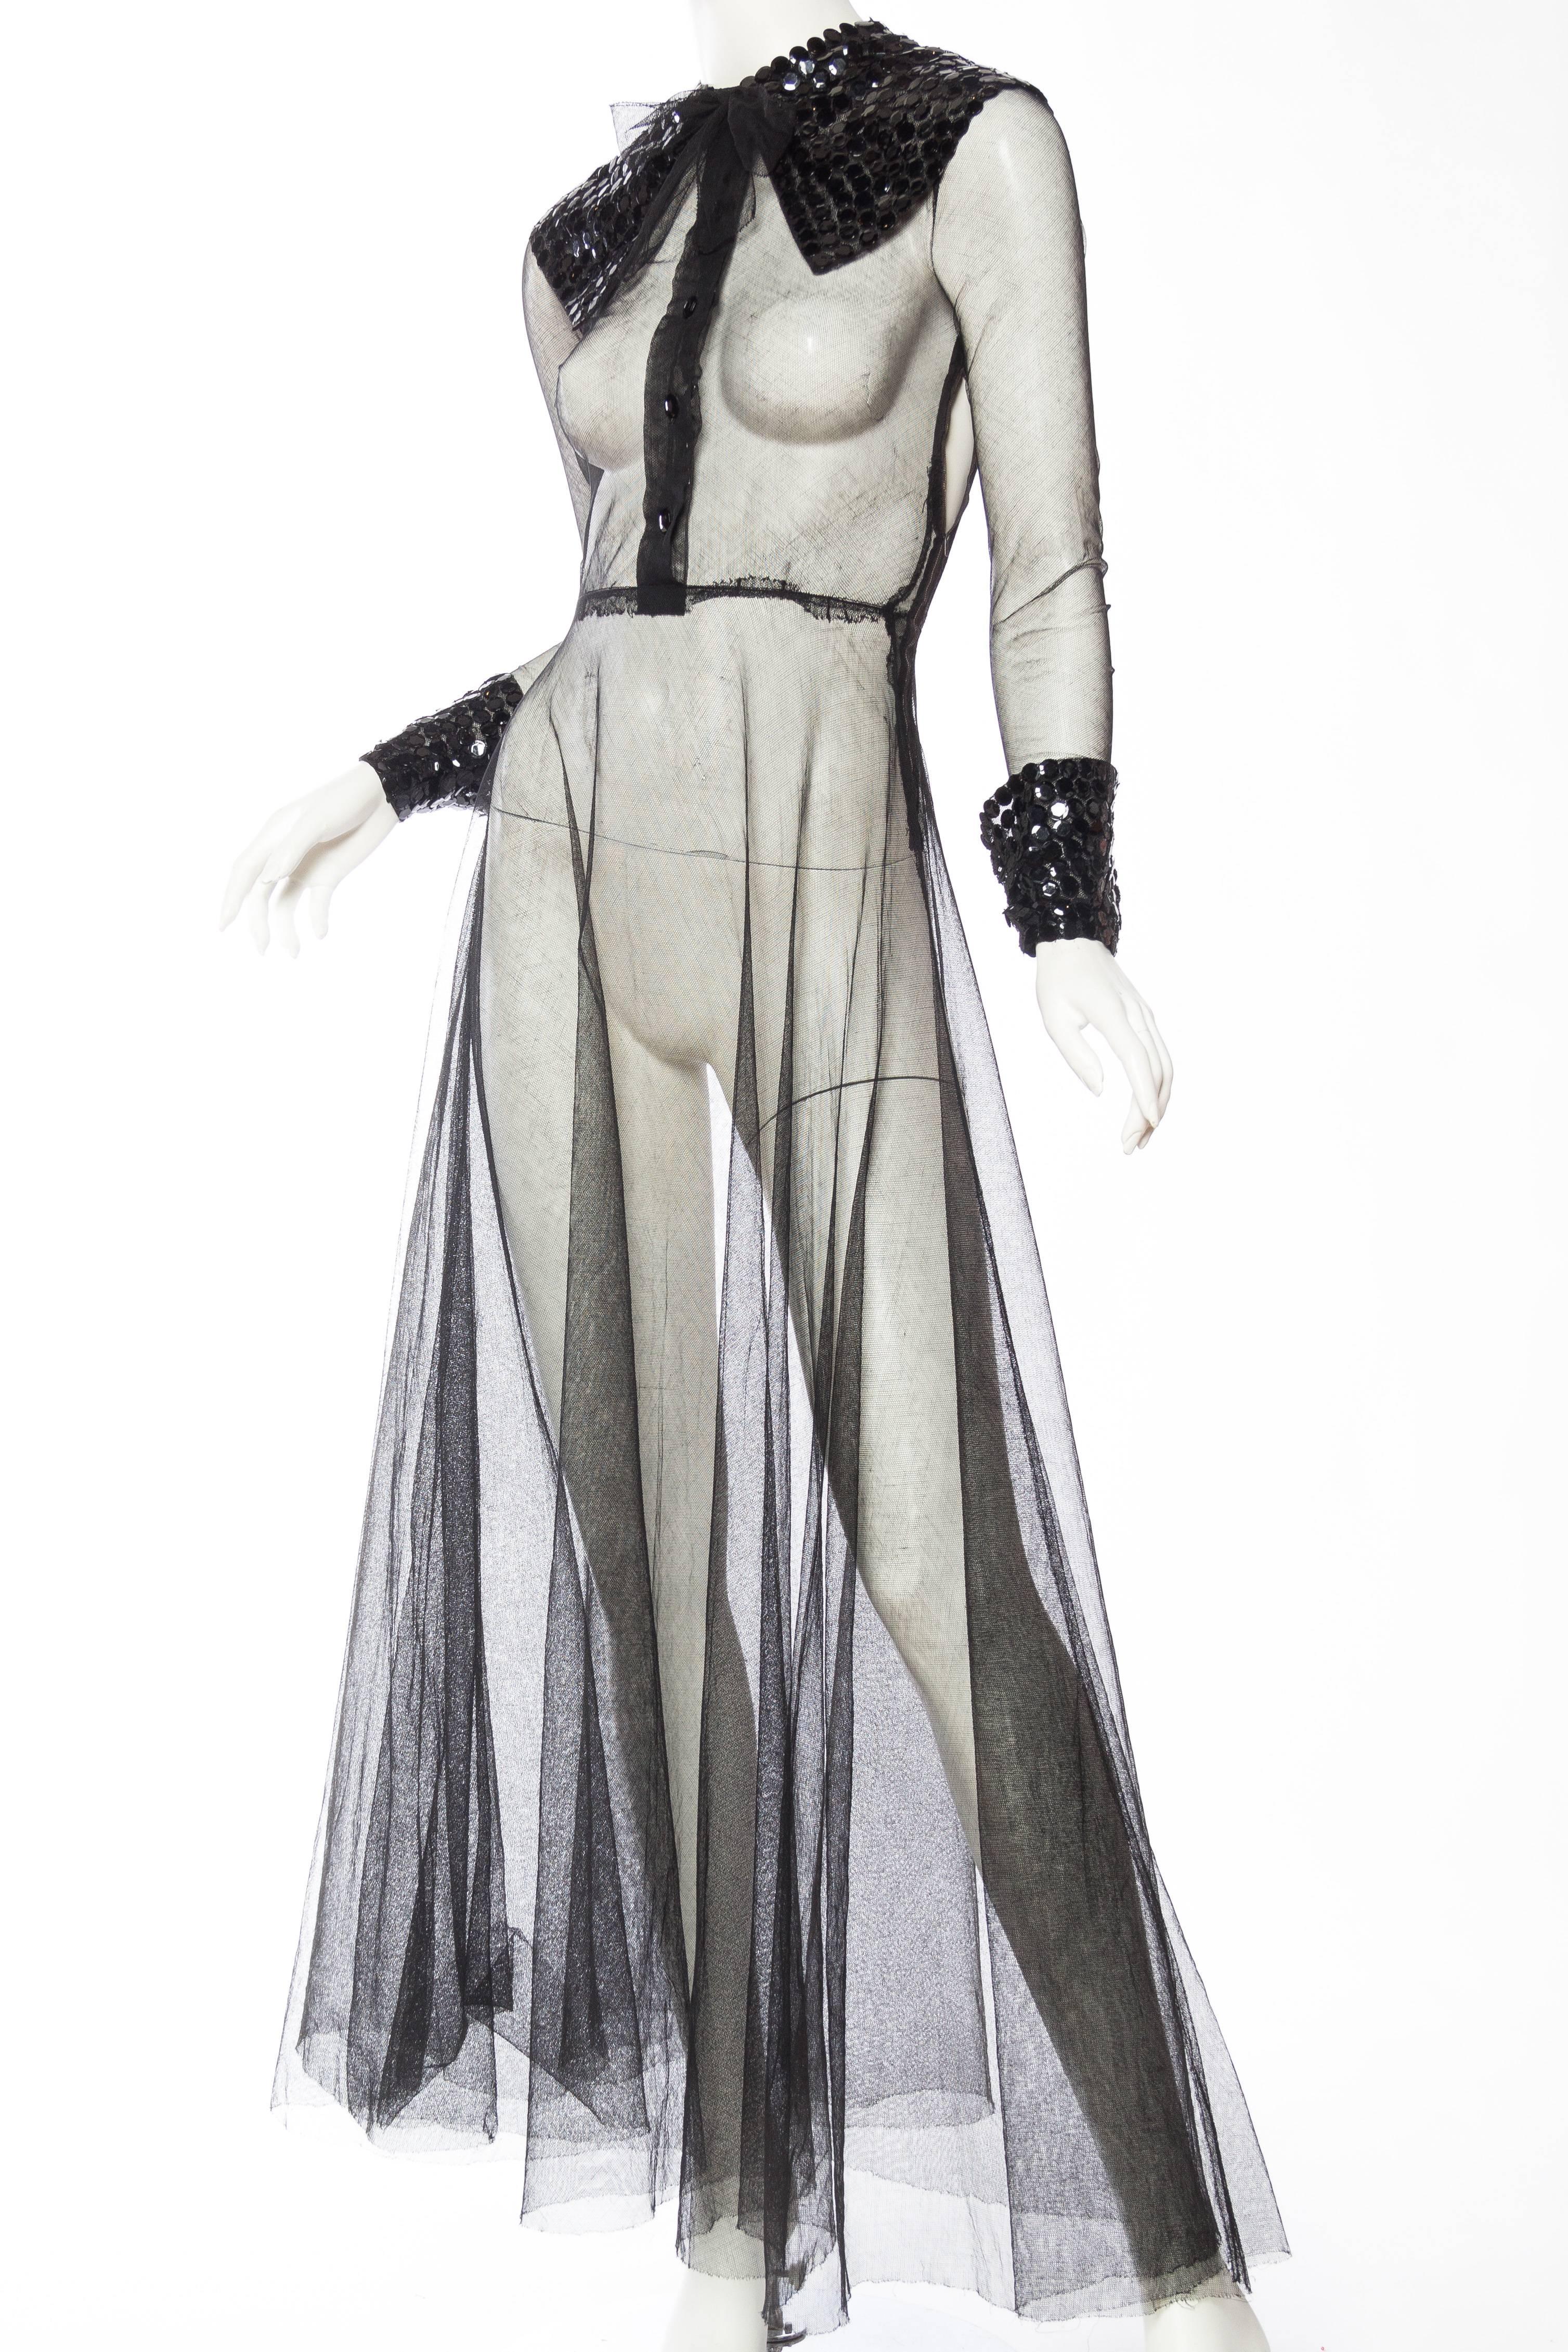 We are in love with this dress from the 1930s which is obviously Lanvin inspired however it is quite similar to today's Gucci don't you think? The net of the dress is in near flawless condition however there are a few minor holes which is to be